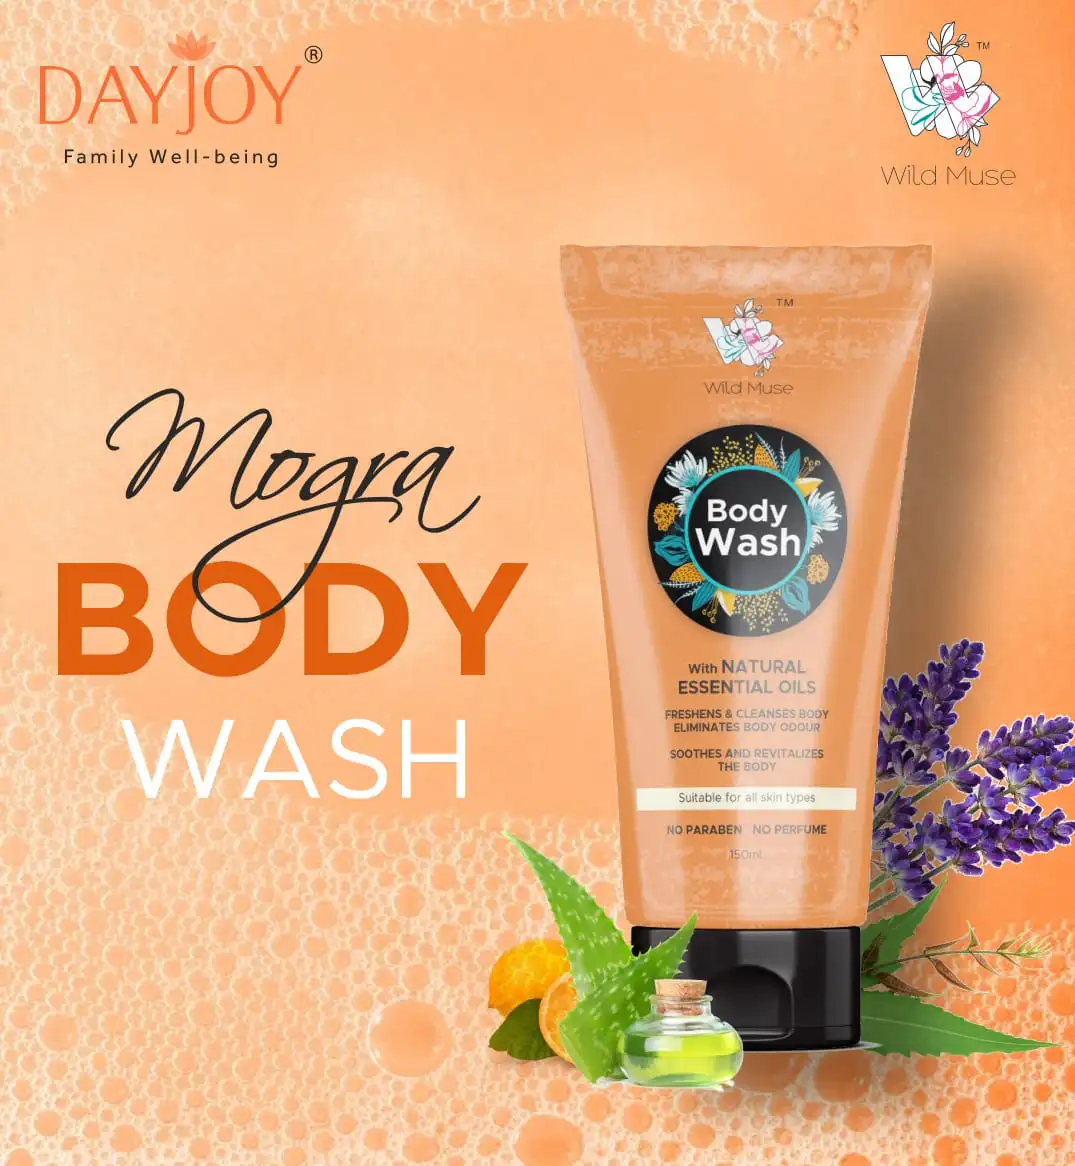 Wild Muse Mogra and Lavender Body Wash- best body wash, perfect for all skin